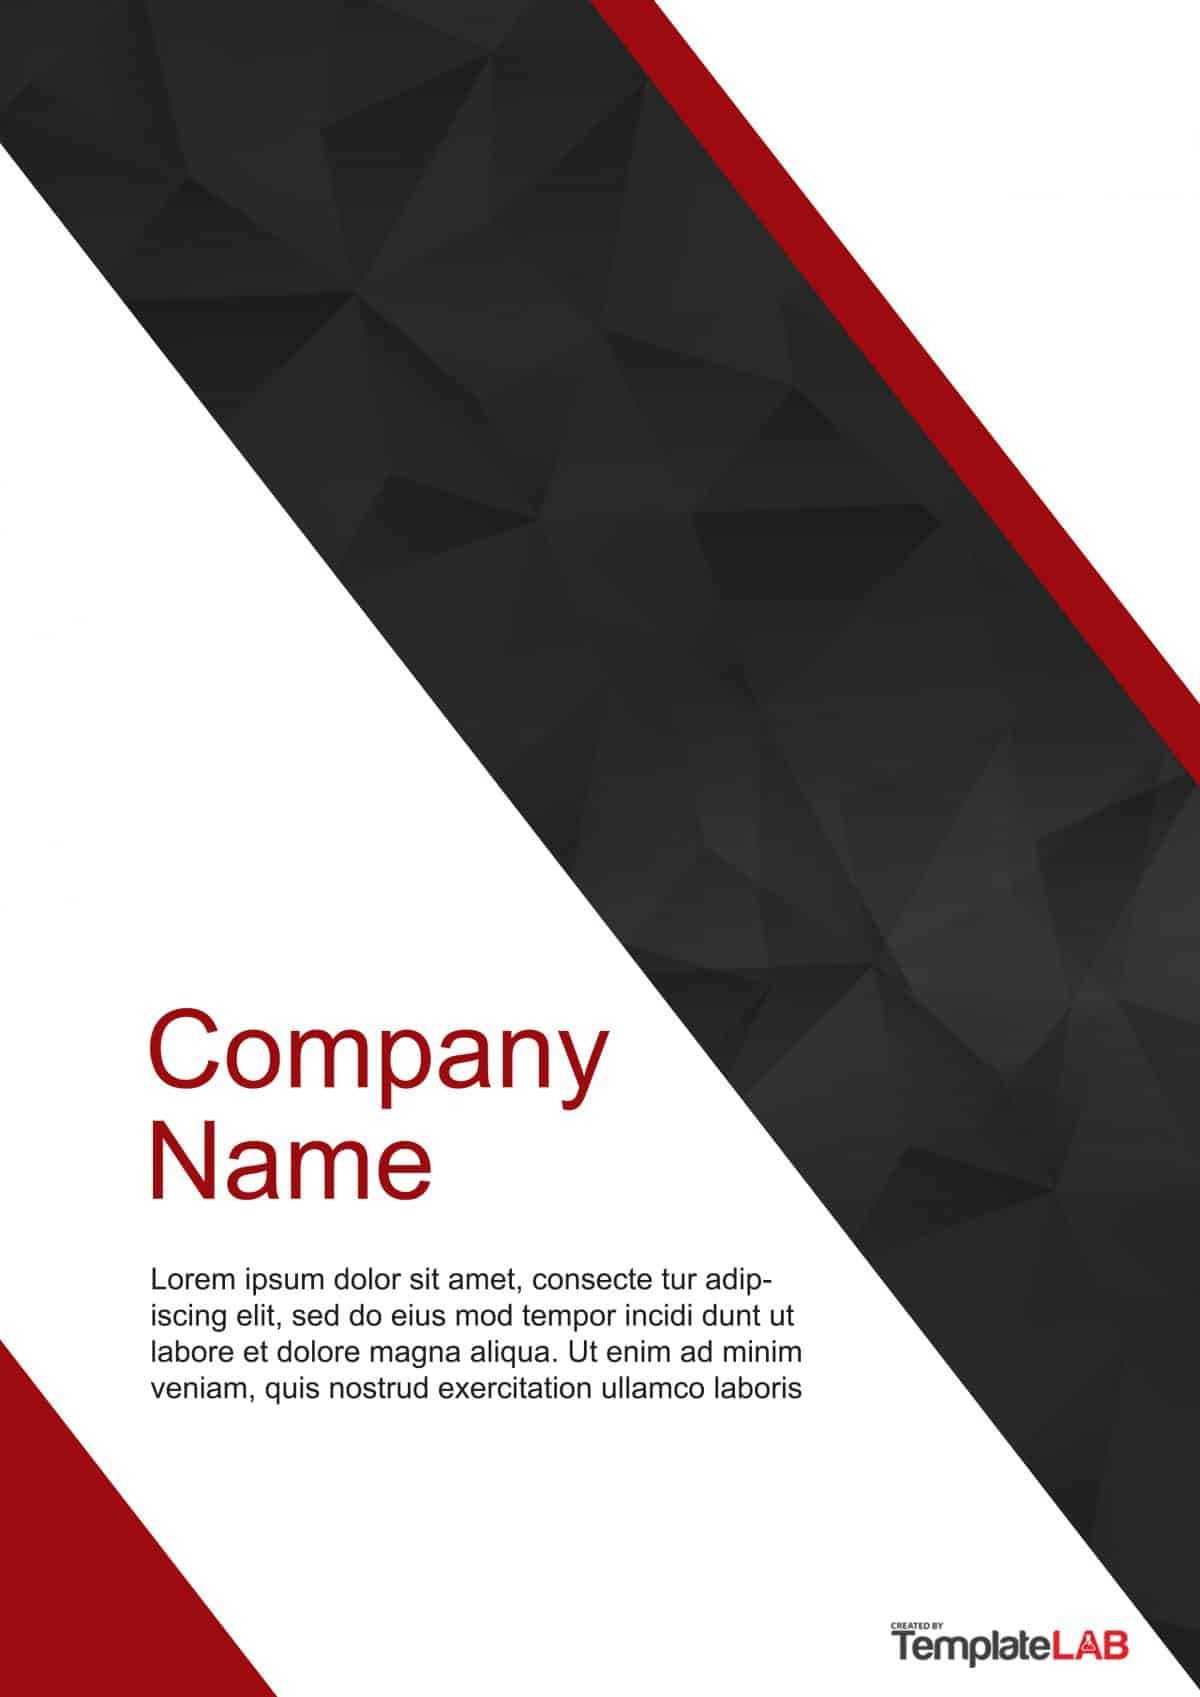 39 Amazing Cover Page Templates (Word + Psd) ᐅ Templatelab Within Word Title Page Templates